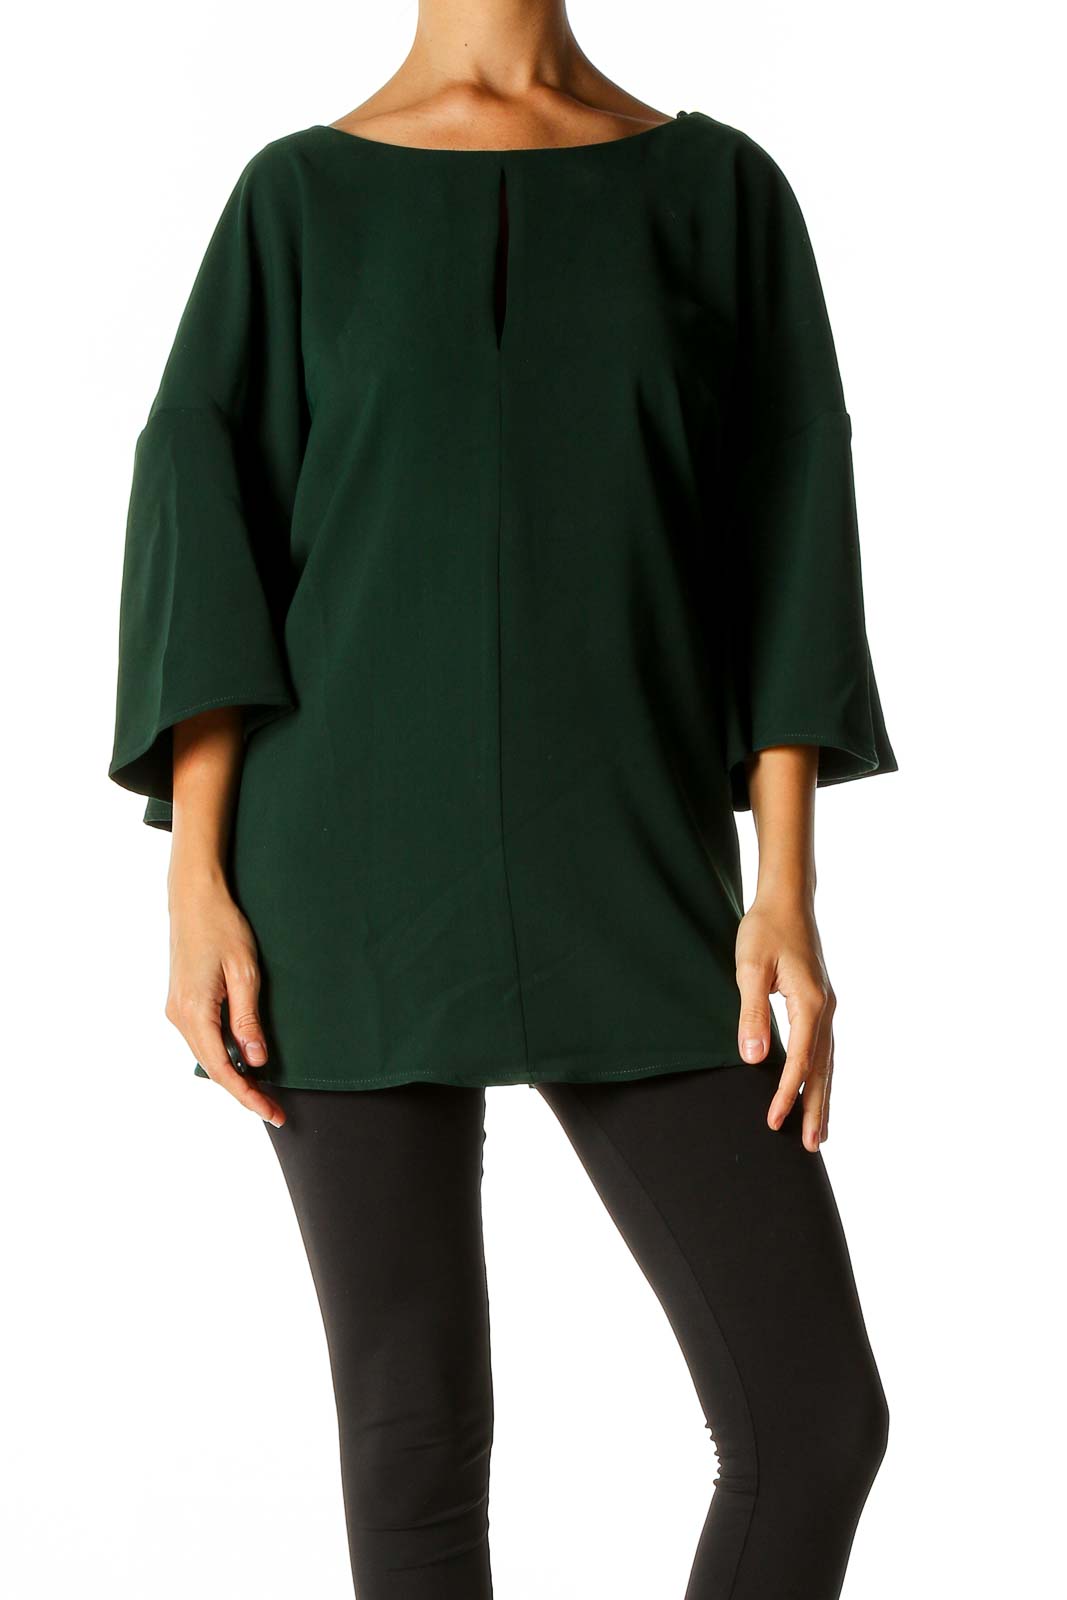 Green Solid Retro Blouse Front